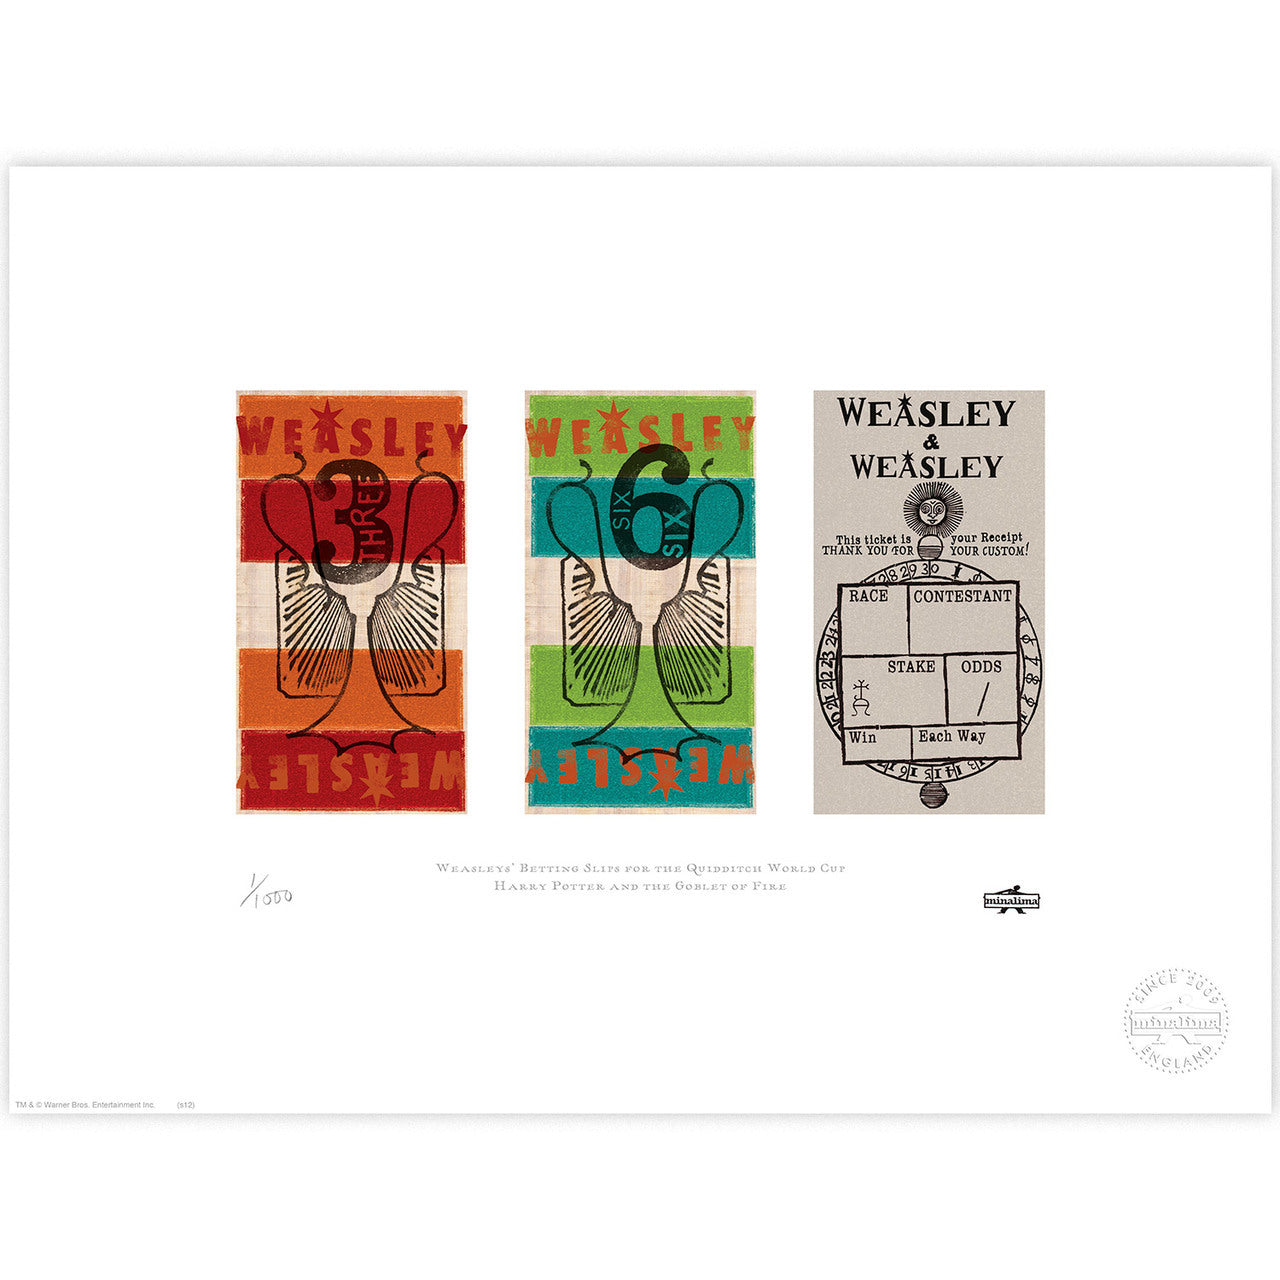 Weasley's Betting Slips Limited Edition Art Print